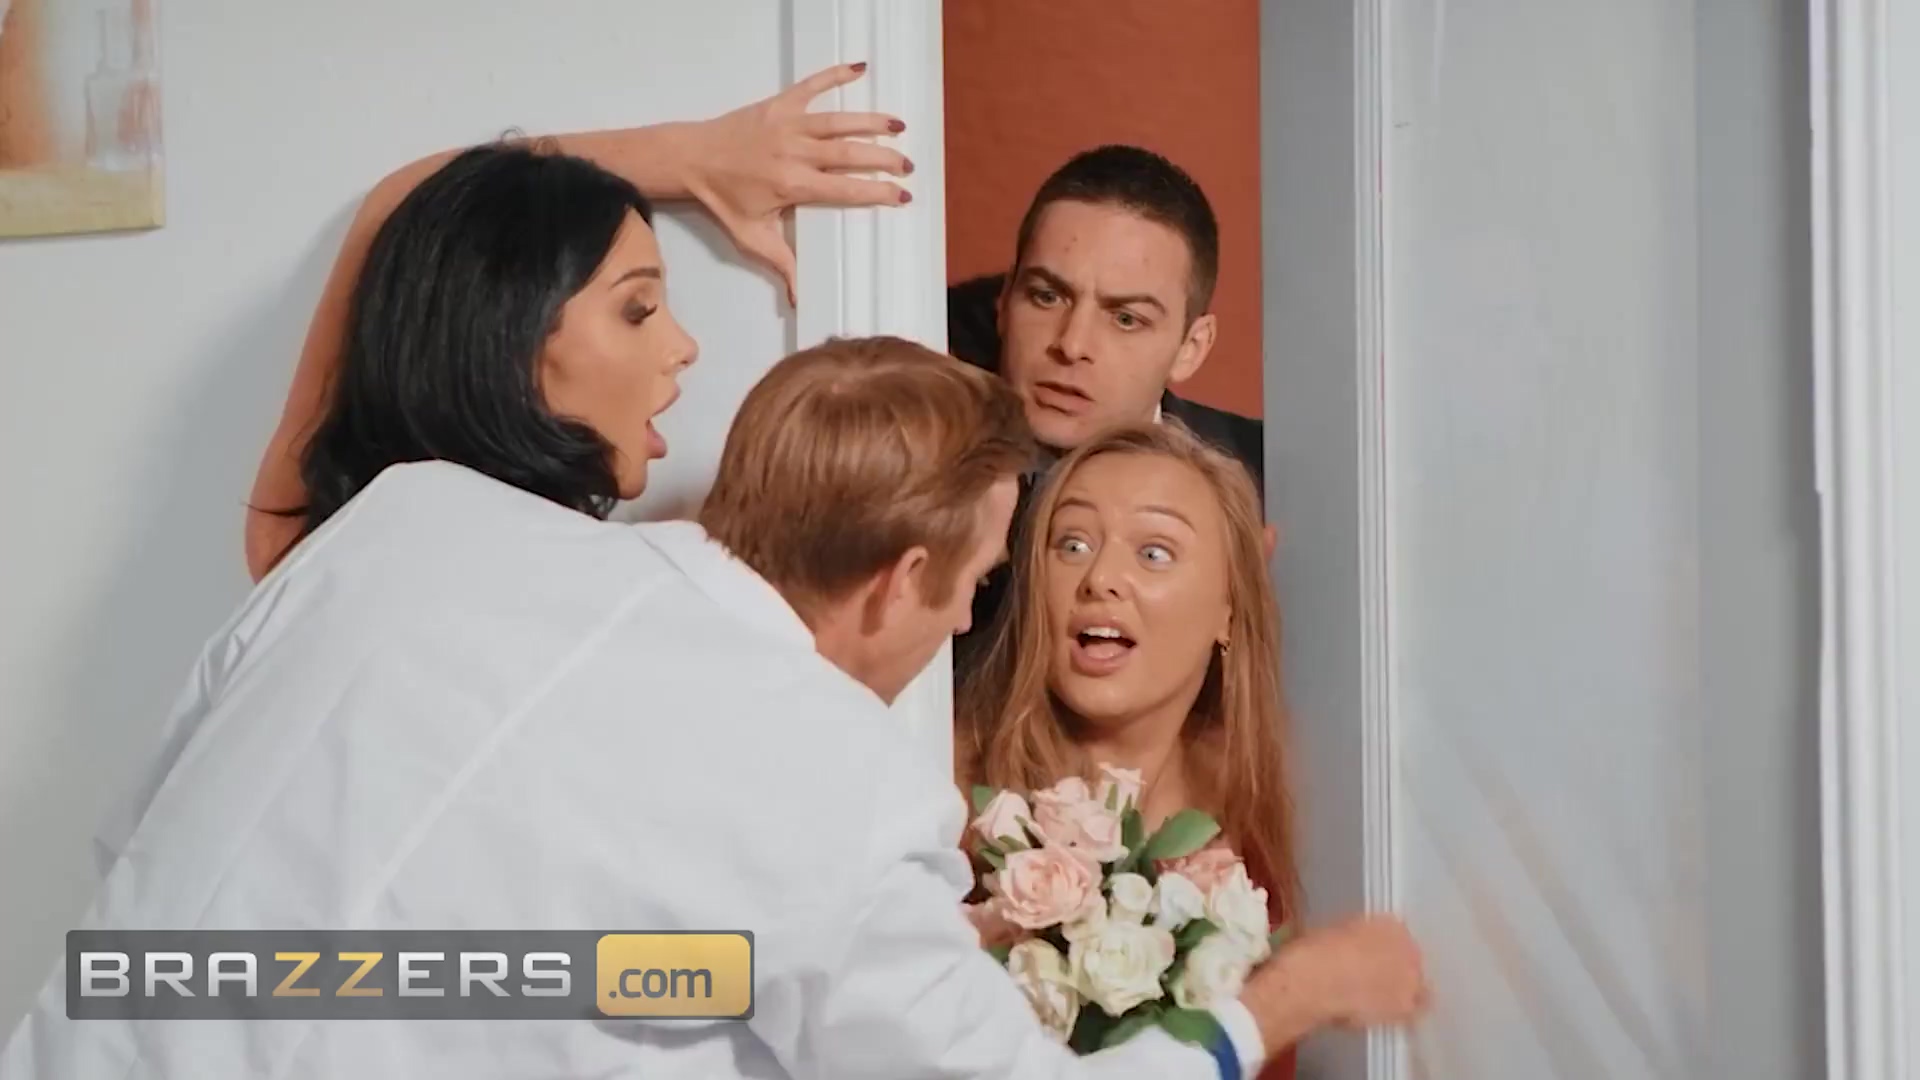 Busty bride cheating on groom with doctor before wedding! pic picture